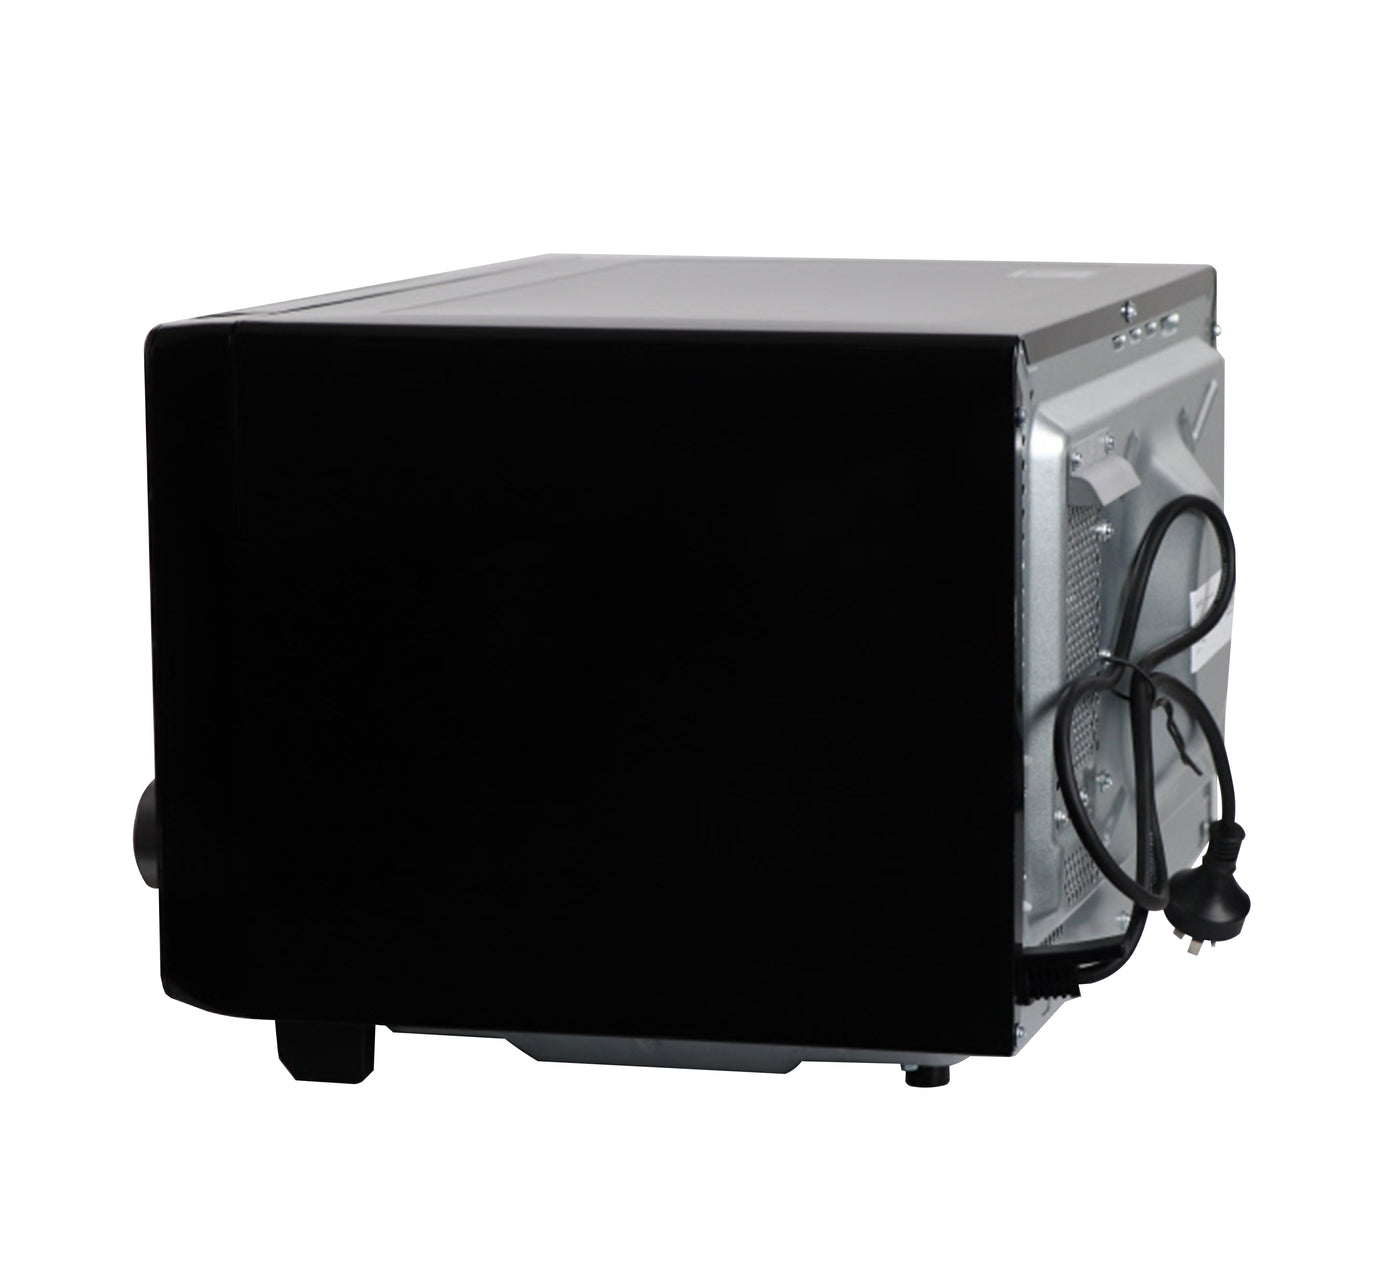 30L 800W Flatbed Microwave & Grill with Inverter Technology